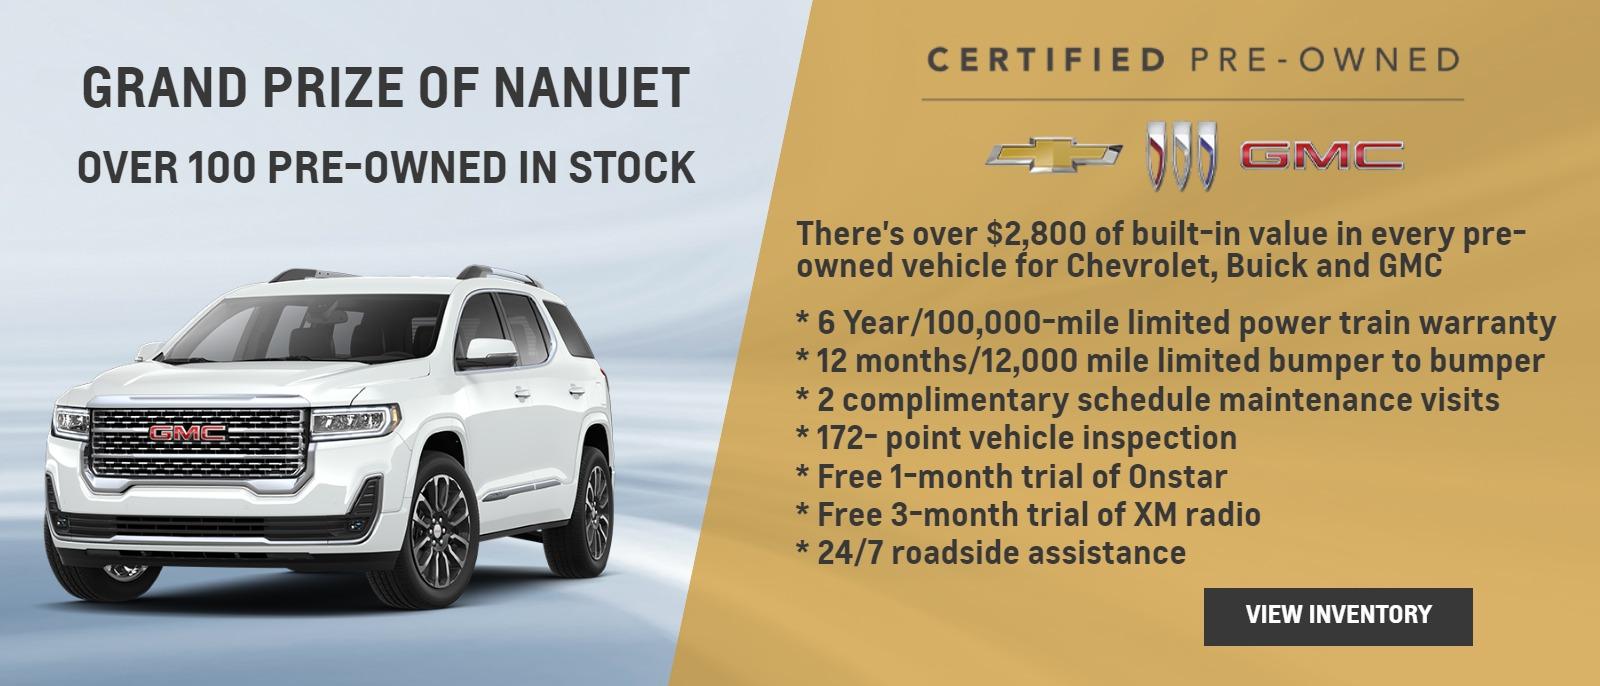 Certified Pre-Owned 
There's over $2,800 of built-in value in every pre owned vehicle for Chevrolet, Buick and GMC * 6 Year/100,000-mile limited power train warranty * 12 months/12,000 mile limited bumper to bumper 2 complimentary schedule maintenance visits * 172-point vehicle inspection * Free 1-month trial of Onstar * * Free 3-month trial of XM radio * 24/7 roadside assistance